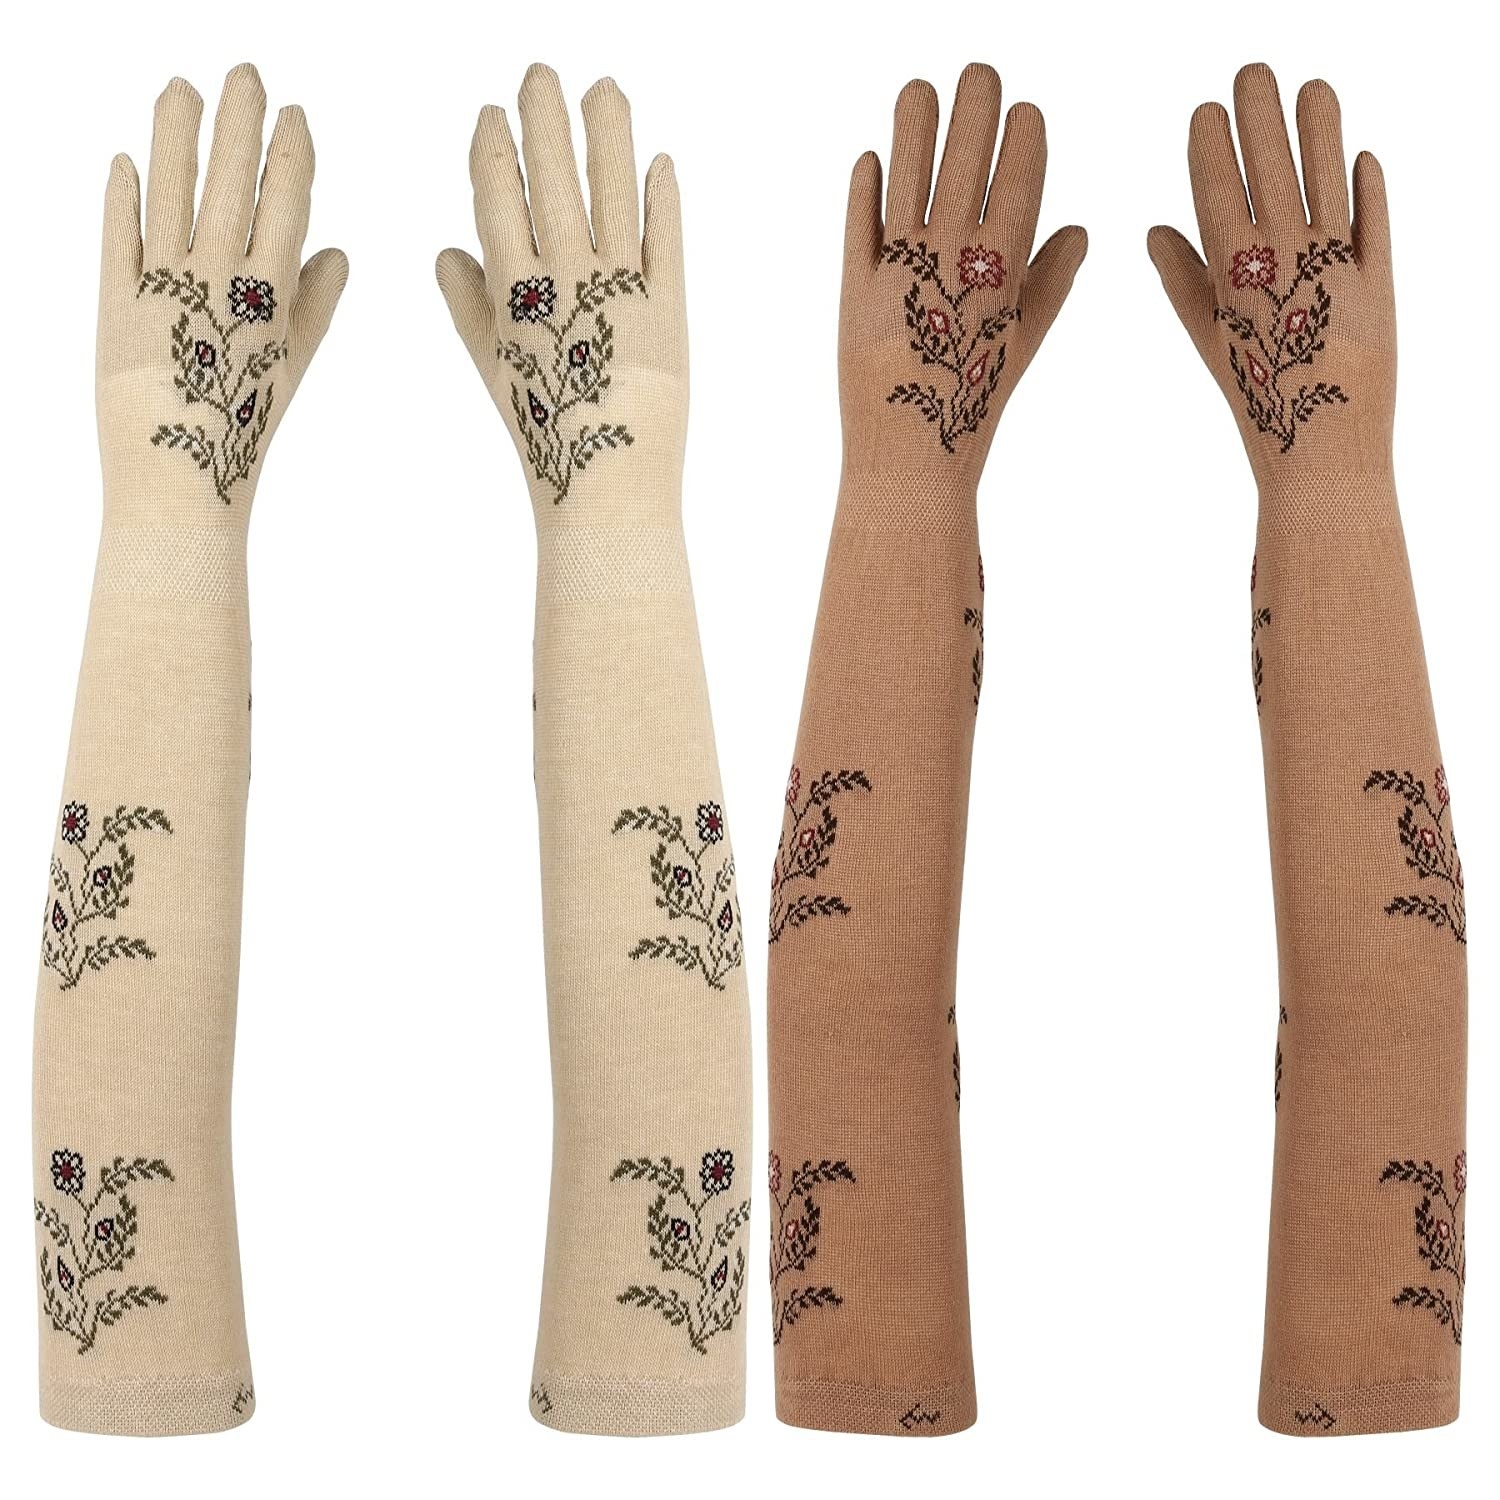 Arm gloves in cream and brown colour.